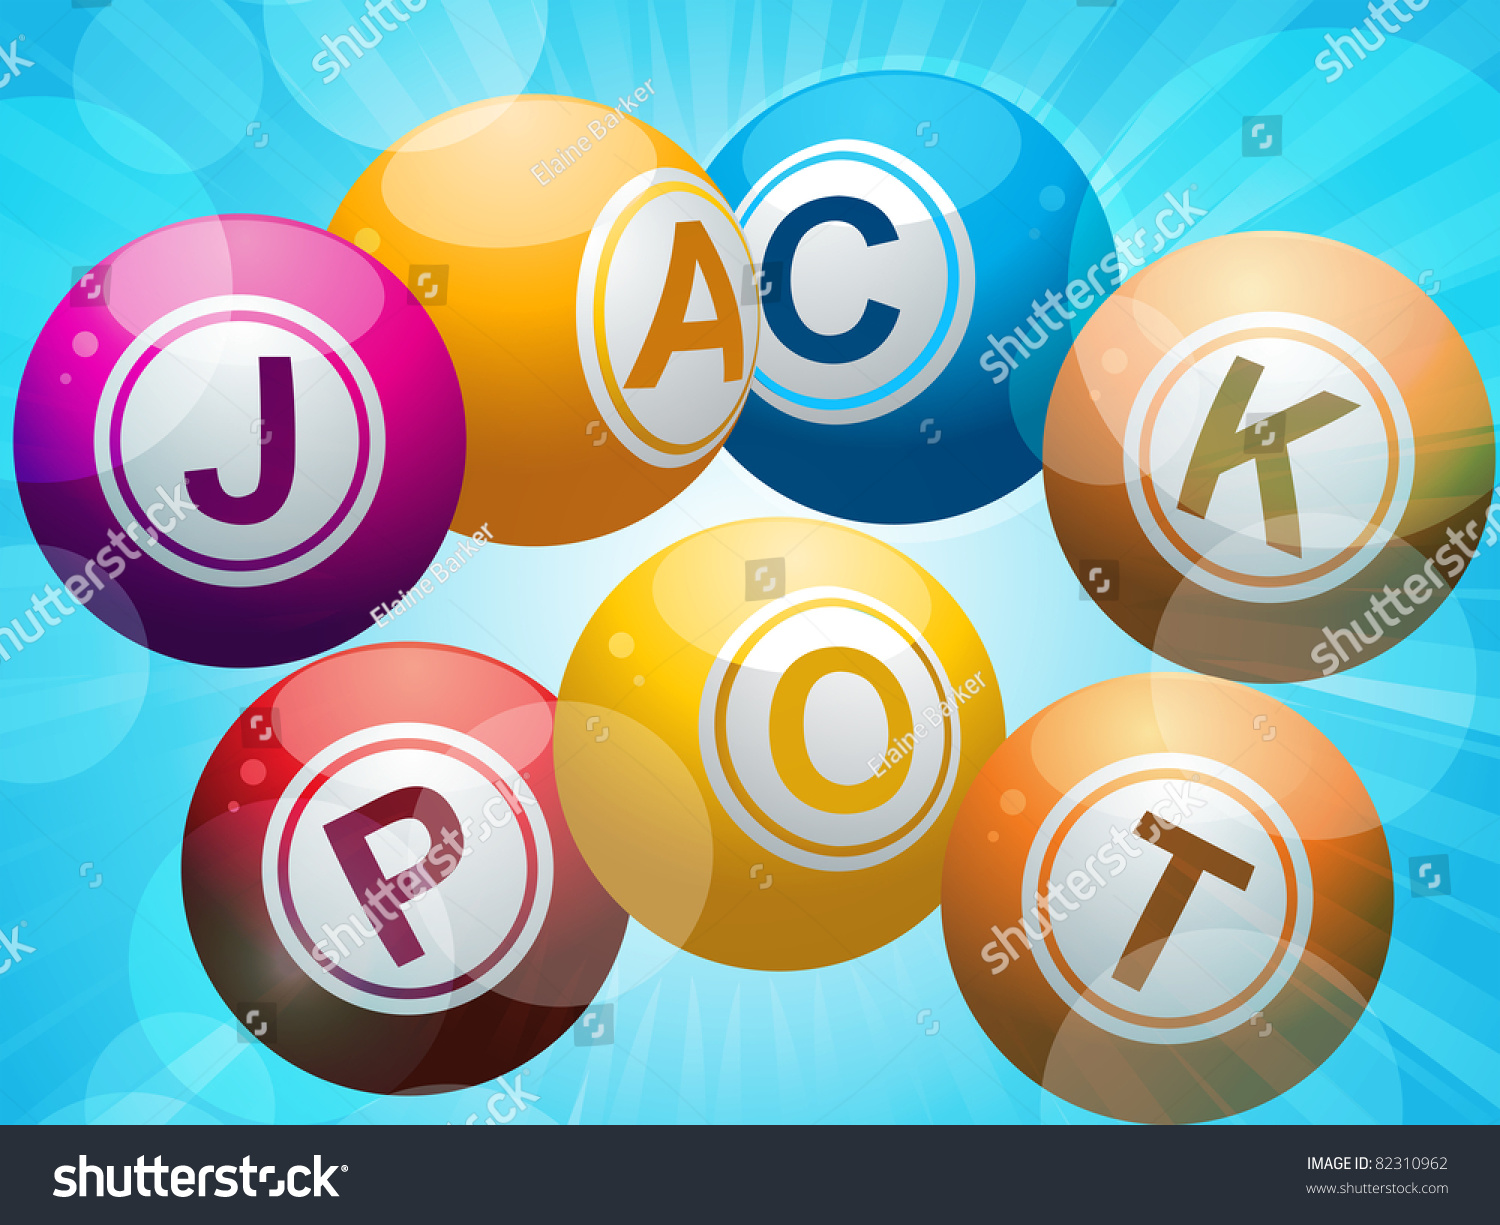 Lottery Or Bing Balls Spelling The Word 'Jackpot' On A Starburst Blue ...